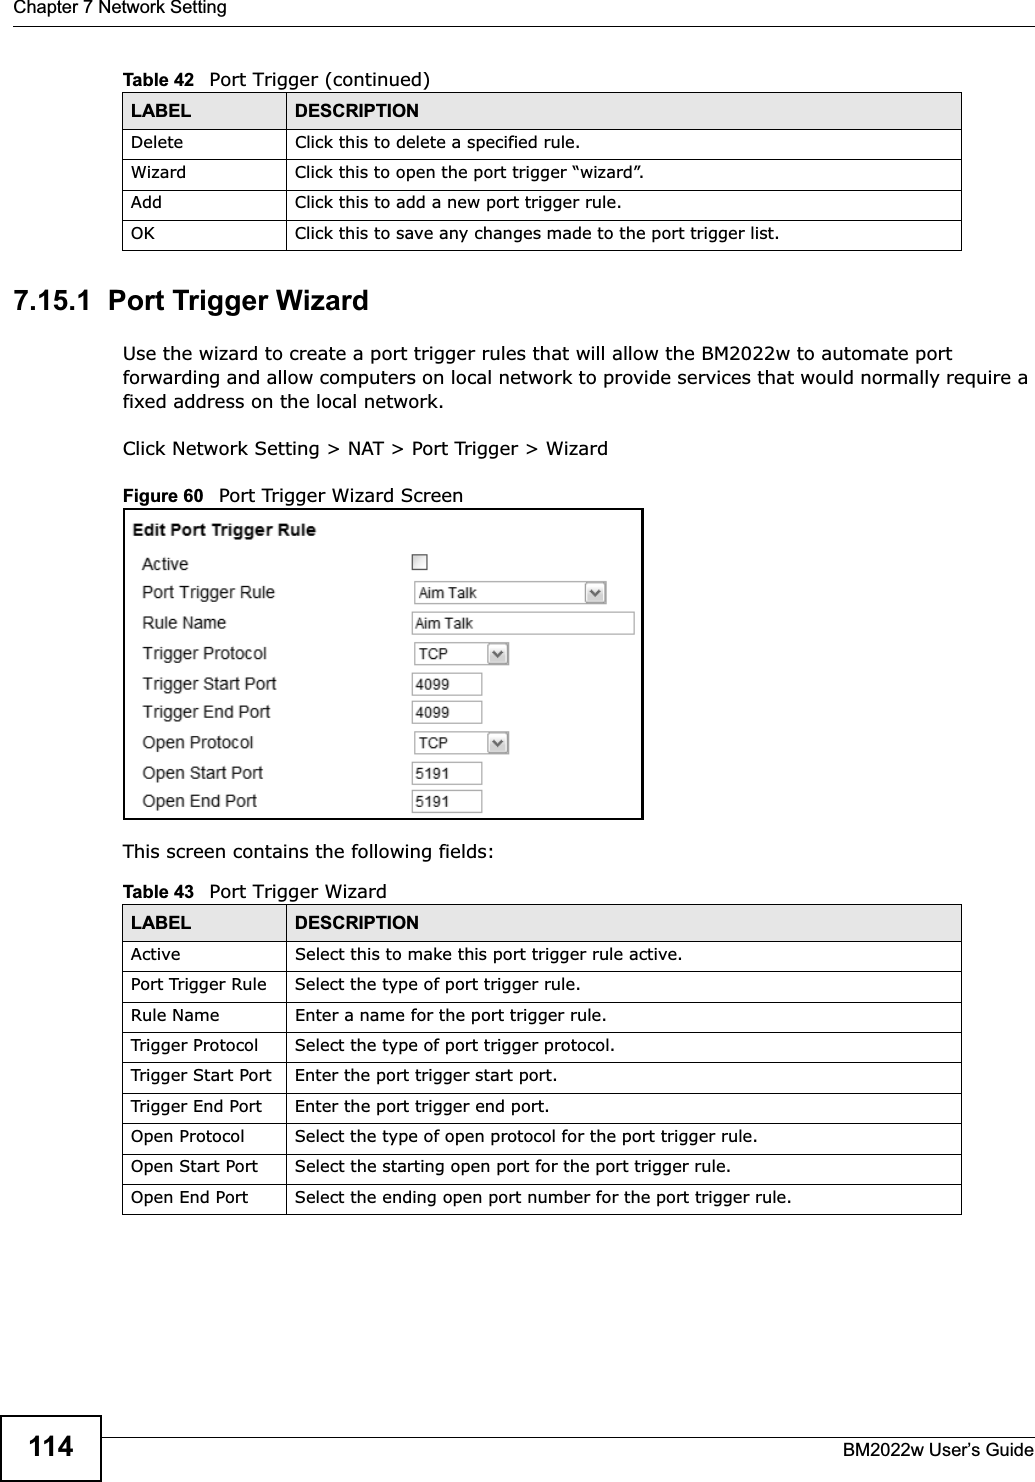 Chapter 7 Network SettingBM2022w User’s Guide1147.15.1  Port Trigger WizardUse the wizard to create a port trigger rules that will allow the BM2022w to automate port forwarding and allow computers on local network to provide services that would normally require a fixed address on the local network.Click Network Setting &gt; NAT &gt; Port Trigger &gt; WizardFigure 60   Port Trigger Wizard ScreenThis screen contains the following fields:Delete Click this to delete a specified rule.Wizard Click this to open the port trigger “wizard”.Add Click this to add a new port trigger rule.OK Click this to save any changes made to the port trigger list.Table 42   Port Trigger (continued)LABEL DESCRIPTIONTable 43   Port Trigger WizardLABEL DESCRIPTIONActive Select this to make this port trigger rule active.Port Trigger Rule Select the type of port trigger rule.Rule Name Enter a name for the port trigger rule.Trigger Protocol Select the type of port trigger protocol.Trigger Start Port Enter the port trigger start port.Trigger End Port Enter the port trigger end port.Open Protocol Select the type of open protocol for the port trigger rule.Open Start Port Select the starting open port for the port trigger rule.Open End Port Select the ending open port number for the port trigger rule.